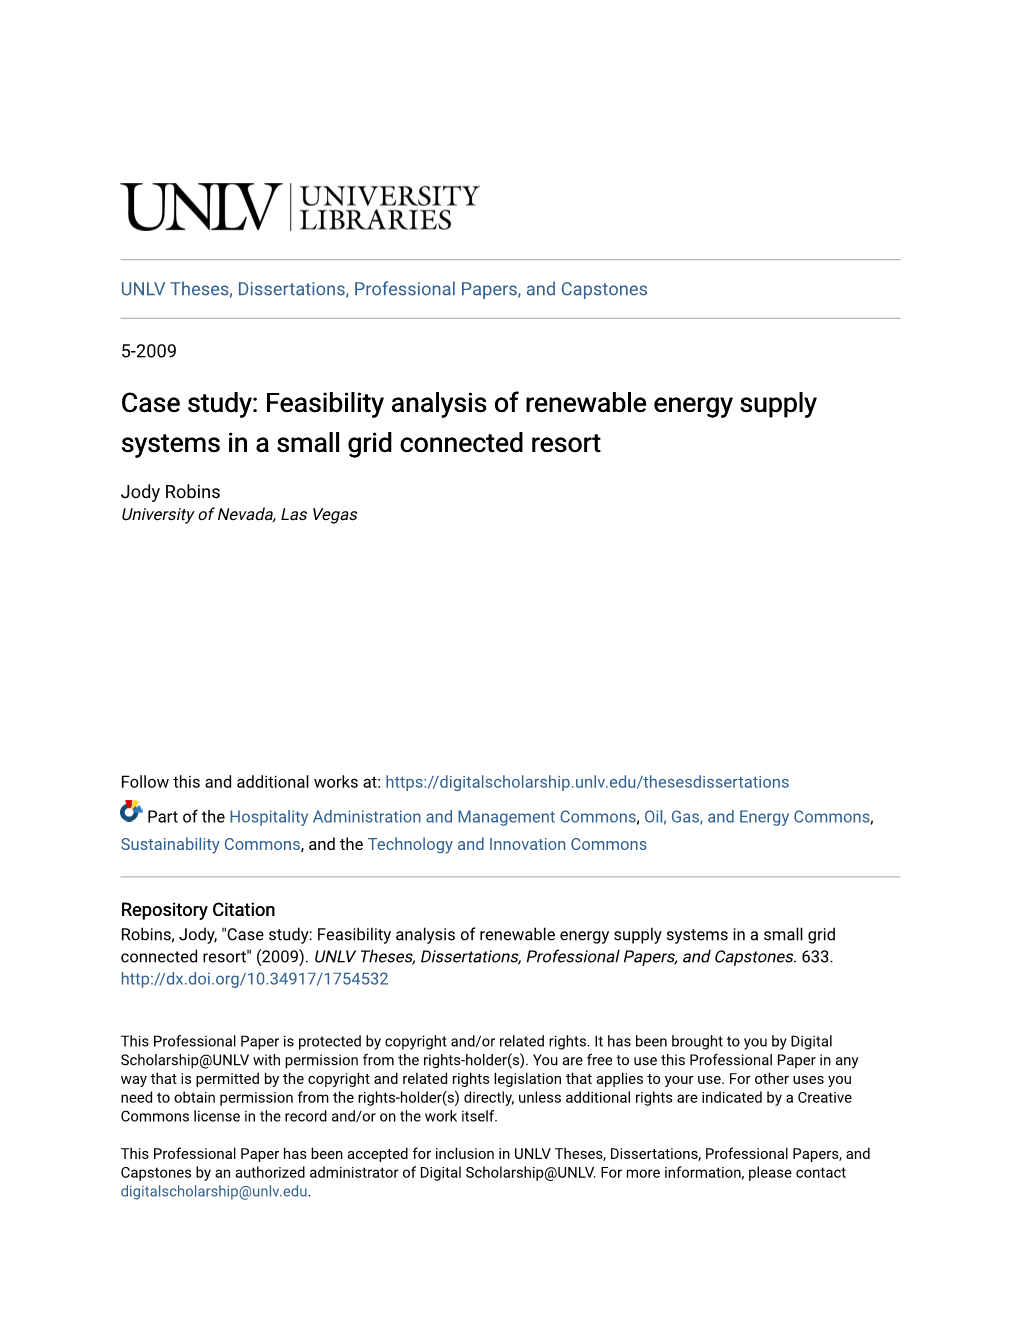 Case Study: Feasibility Analysis of Renewable Energy Supply Systems in a Small Grid Connected Resort